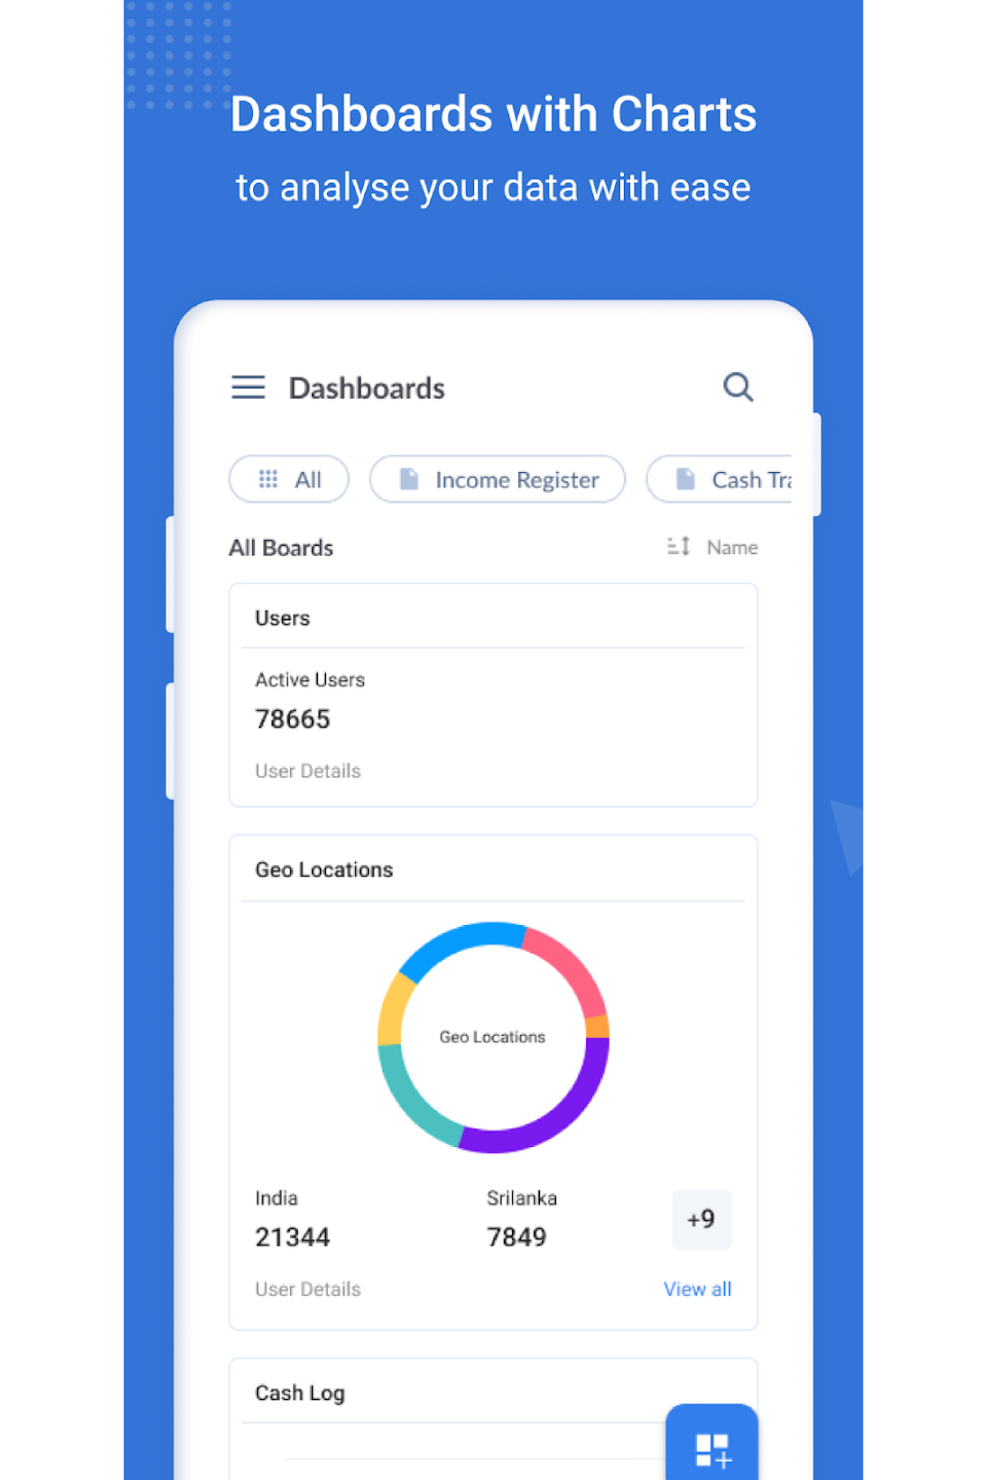 Dashboards with charts to analyze your data with ease.